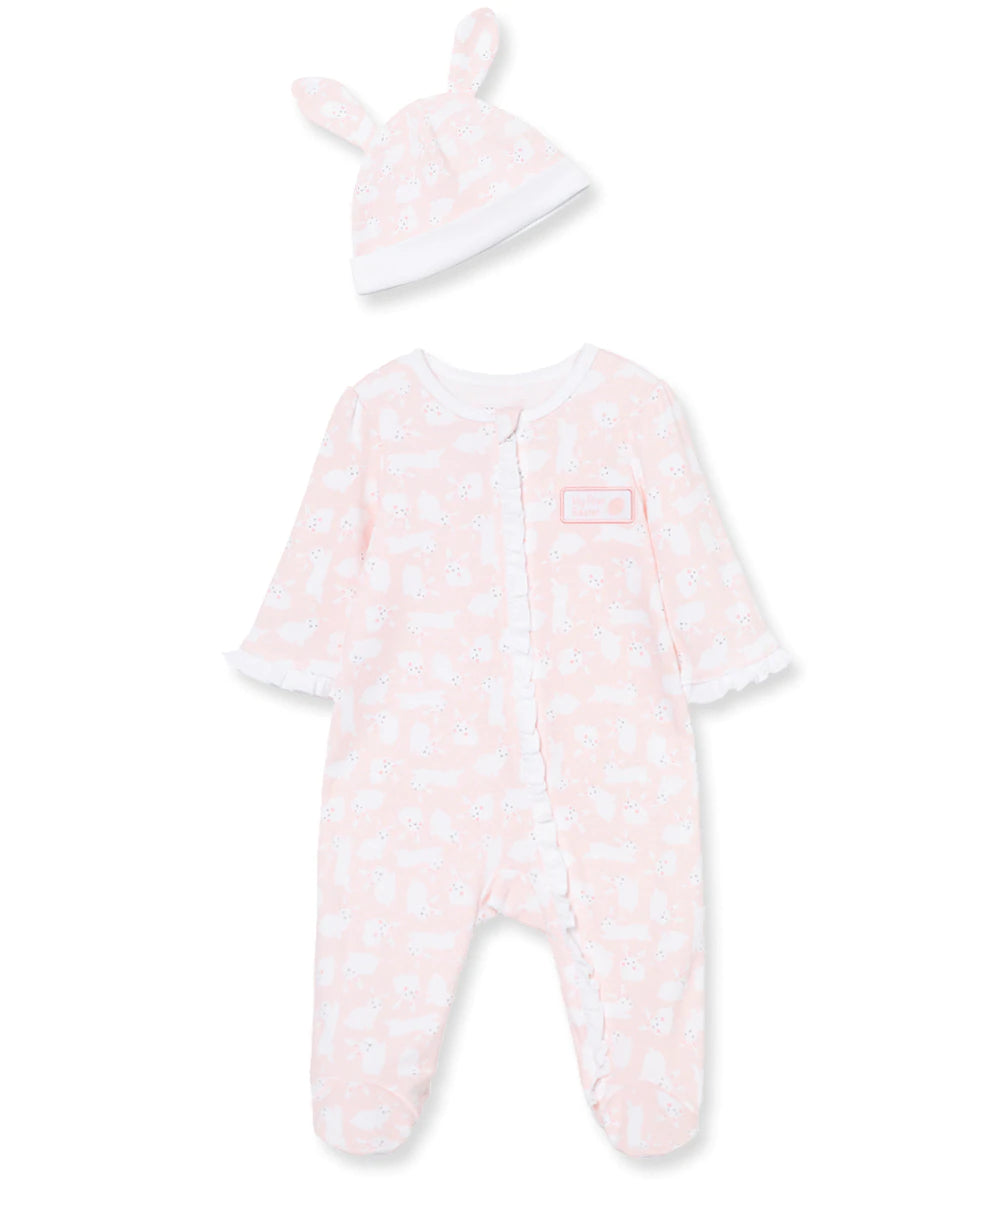 Pink Easter Bunny Footie and Hat 11646